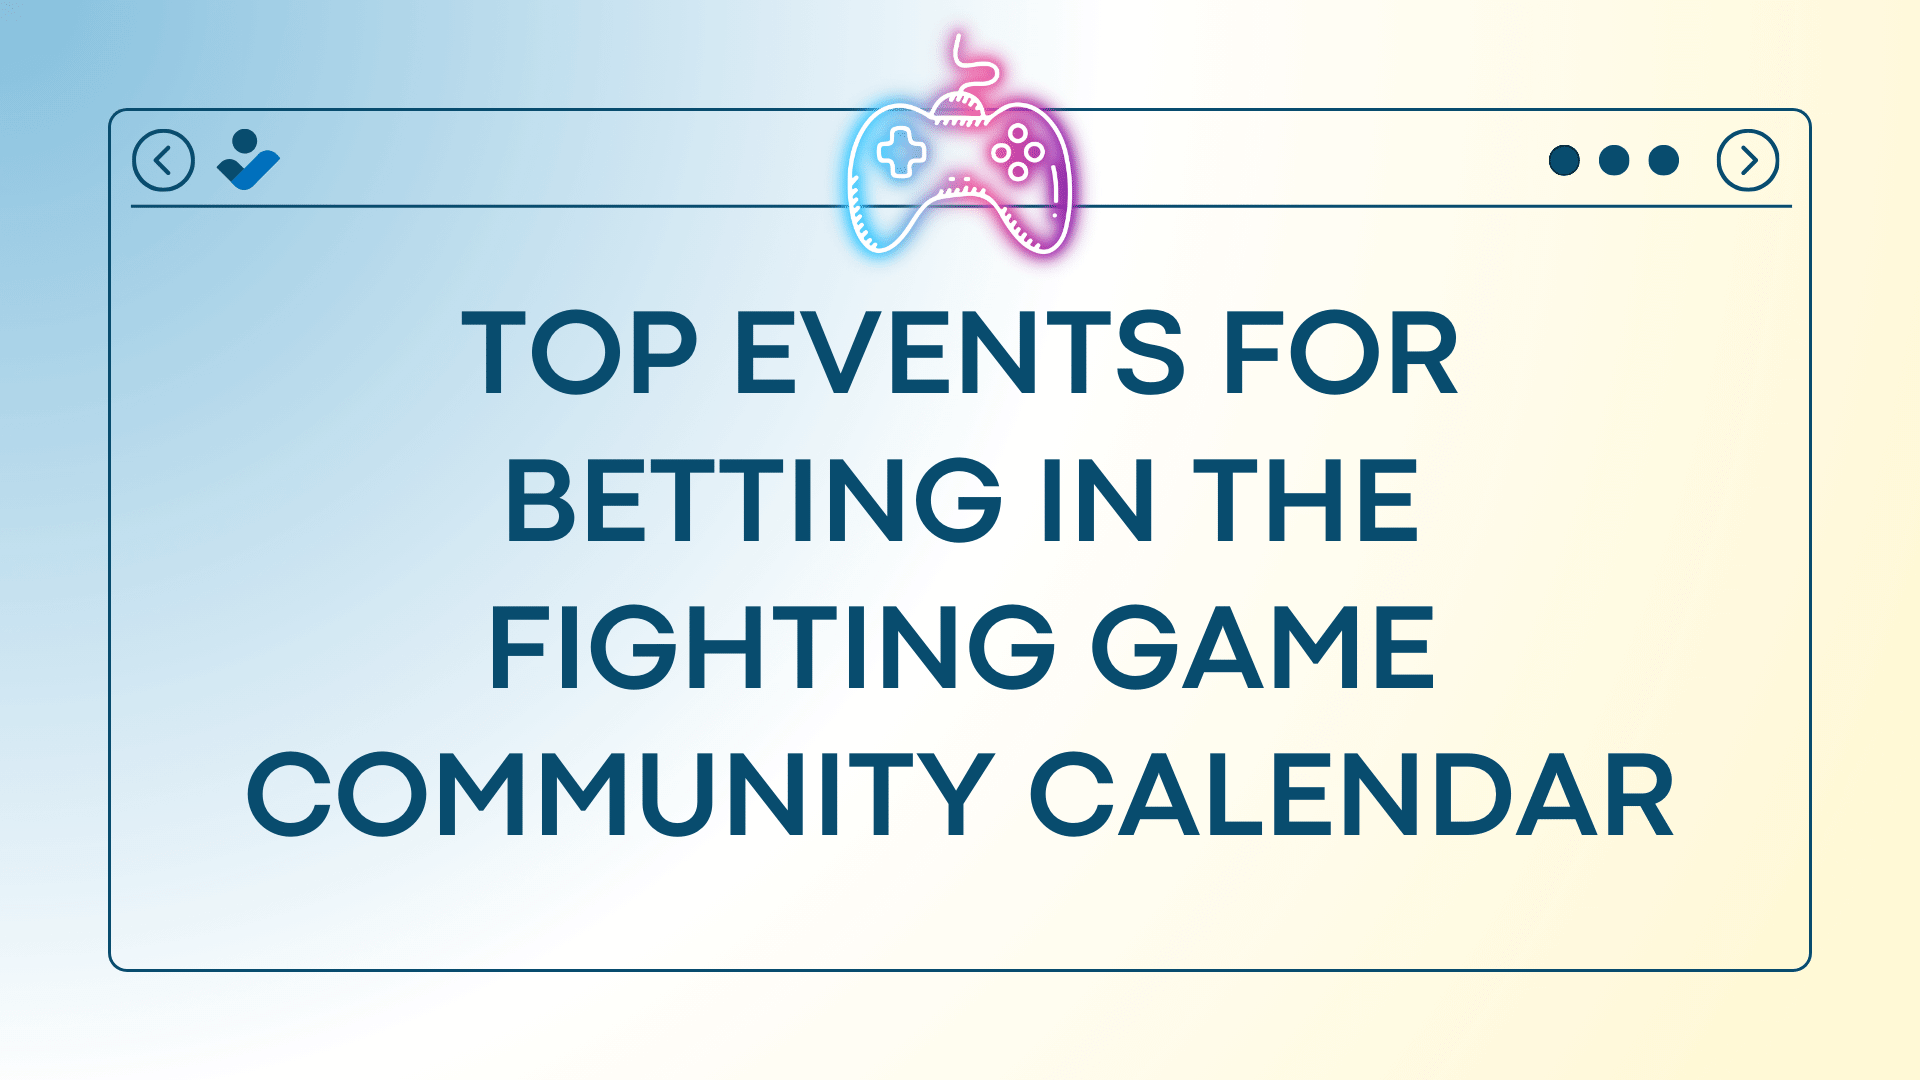 Top Events for Betting in the Fighting Game Community Calendar